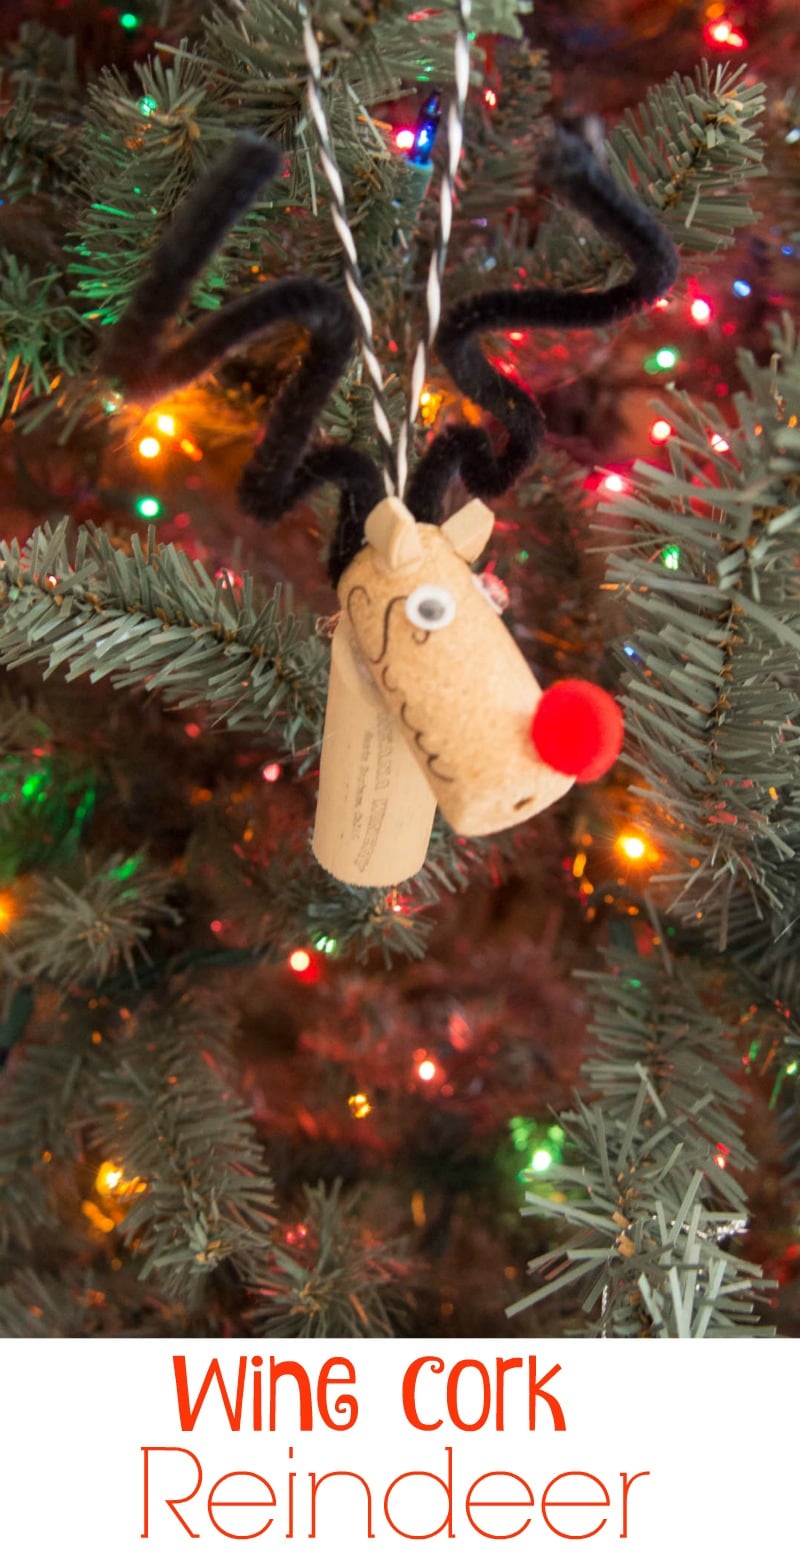 A wine cork reindeer ornament hanging on a Christmas tree.